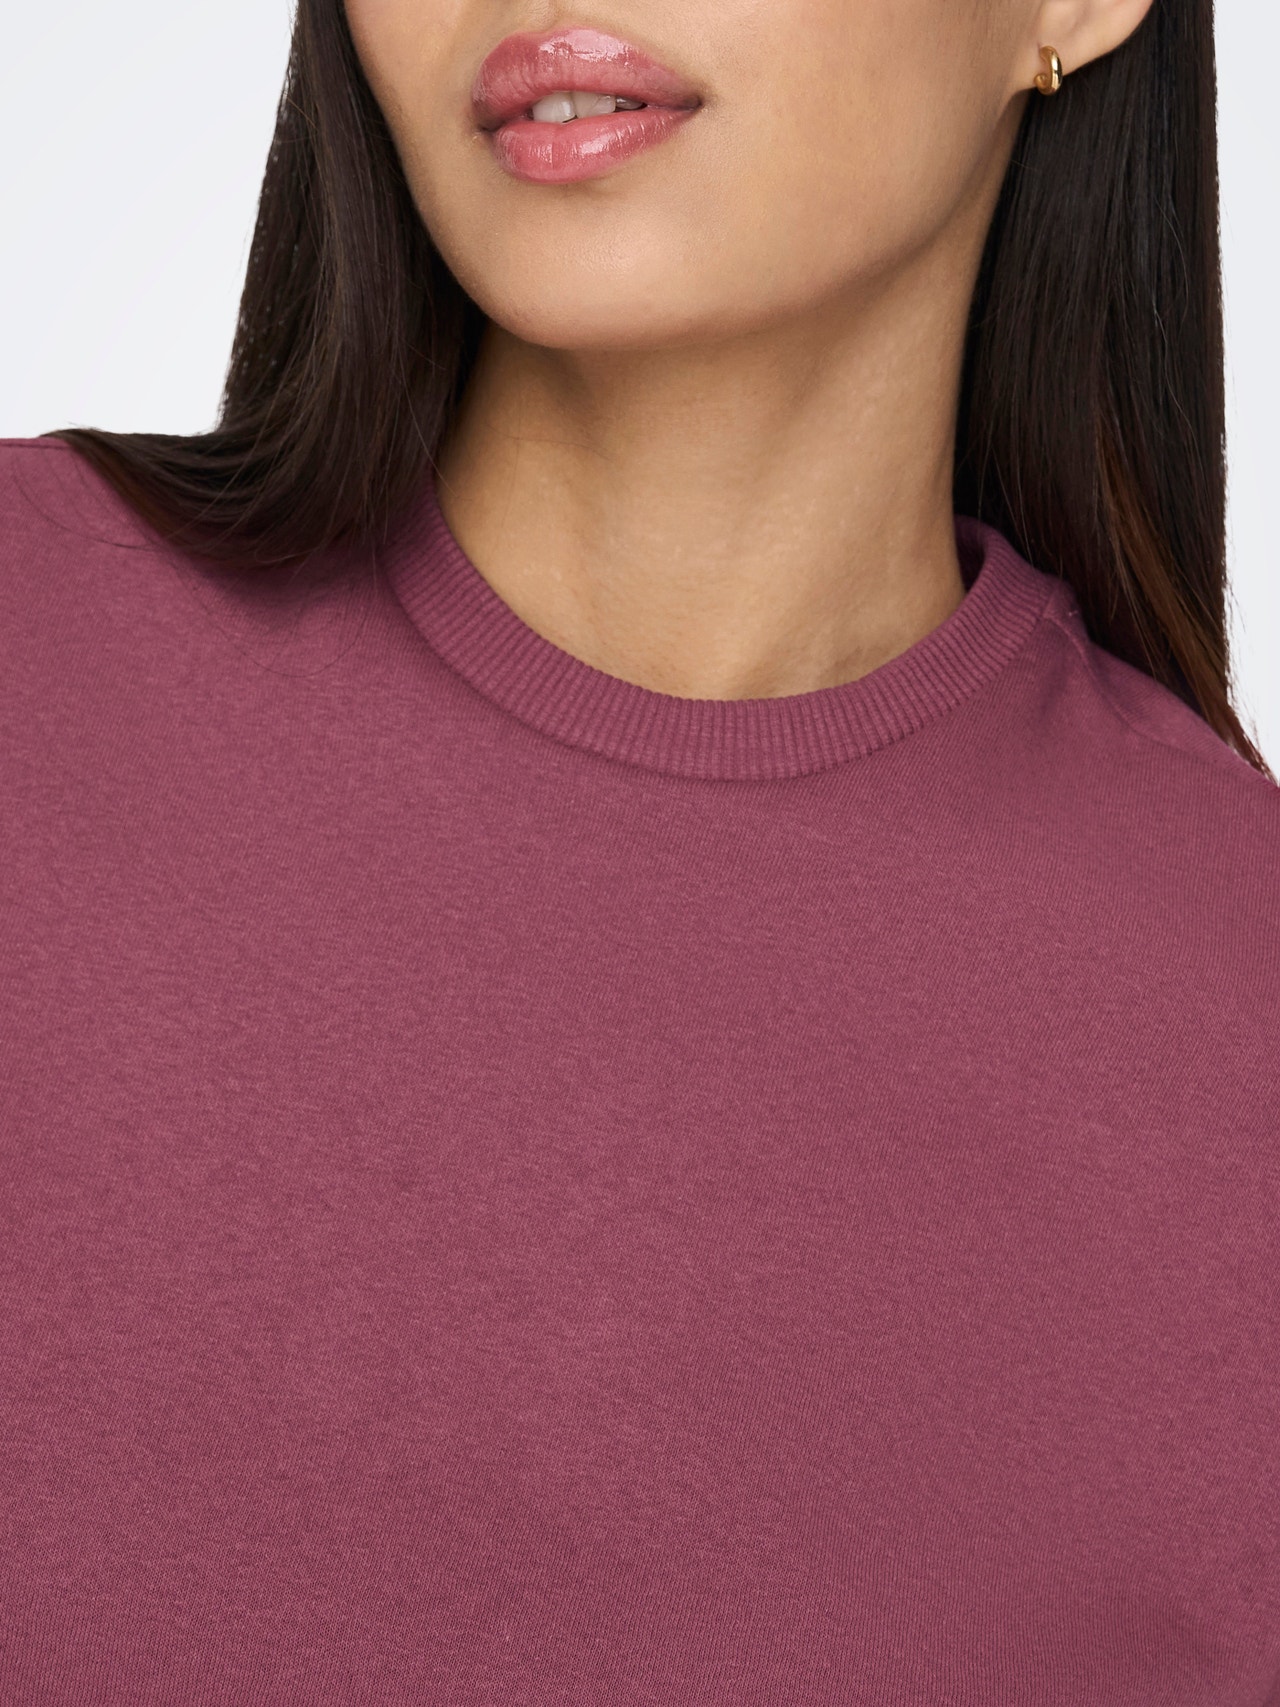 ONLY Long sleeved Sweatshirt -Crushed Berry - 15289279